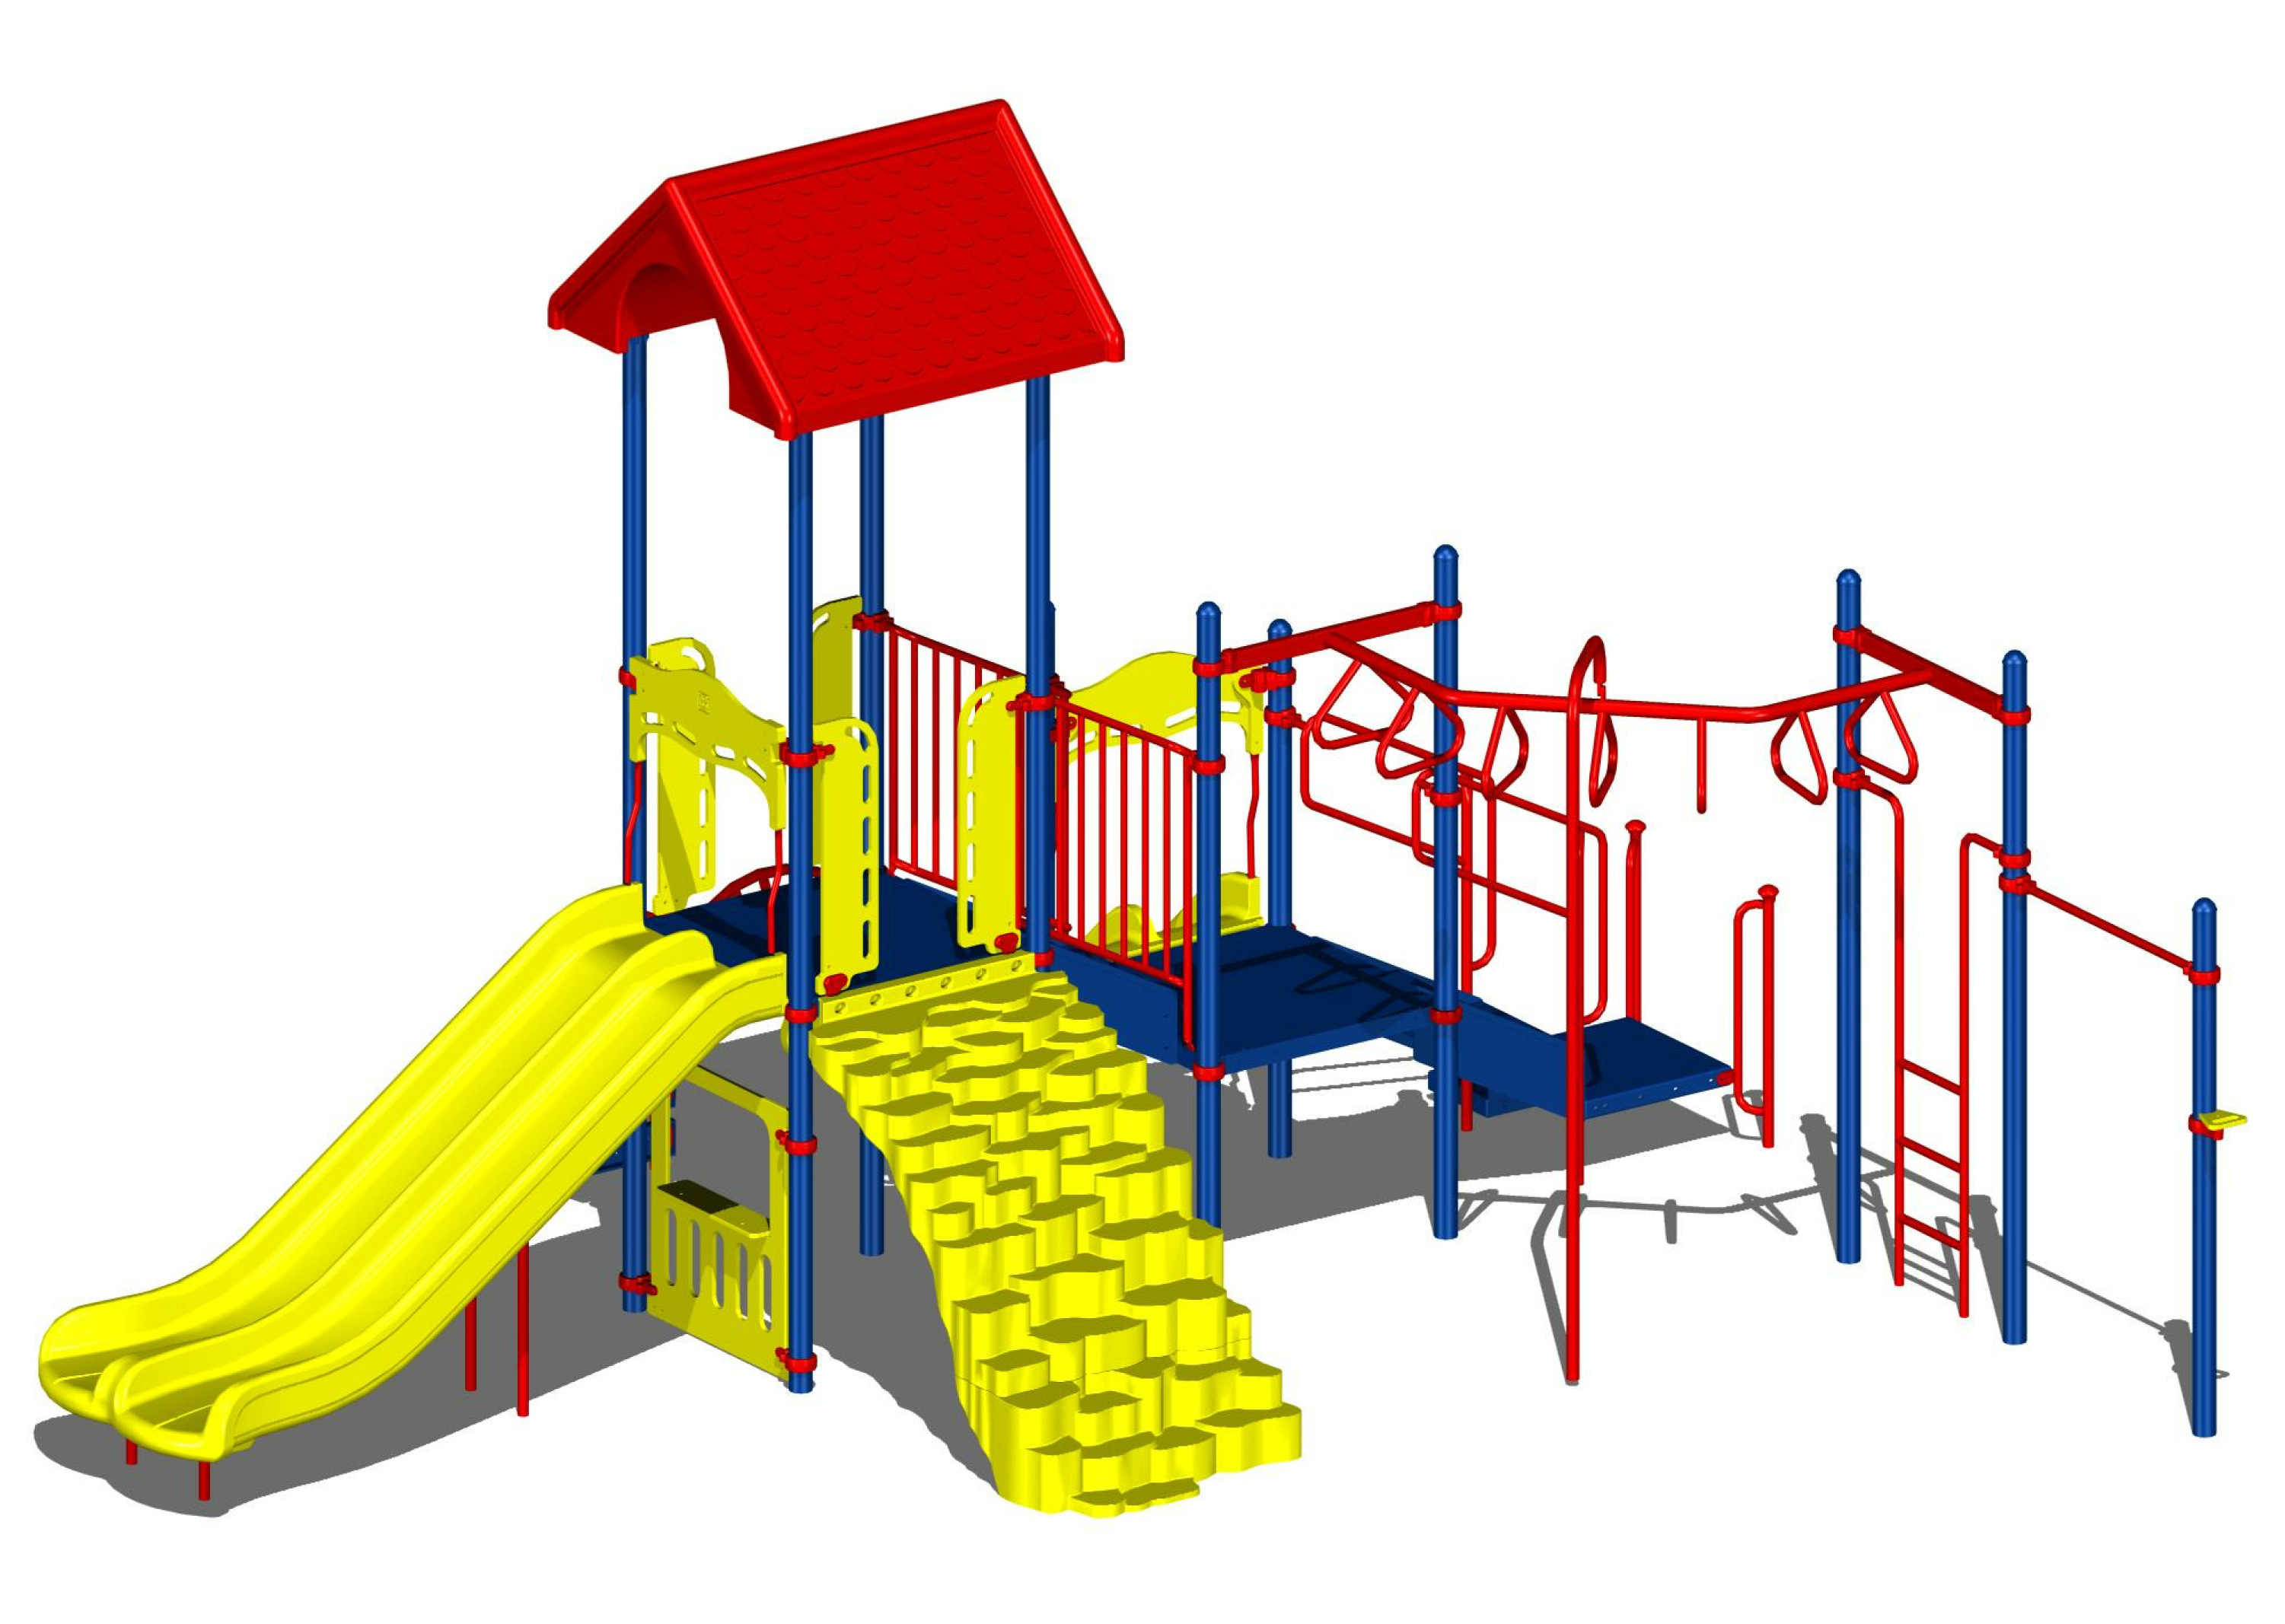 Los Angeles Playground Equipment Company Completes San Diego ...